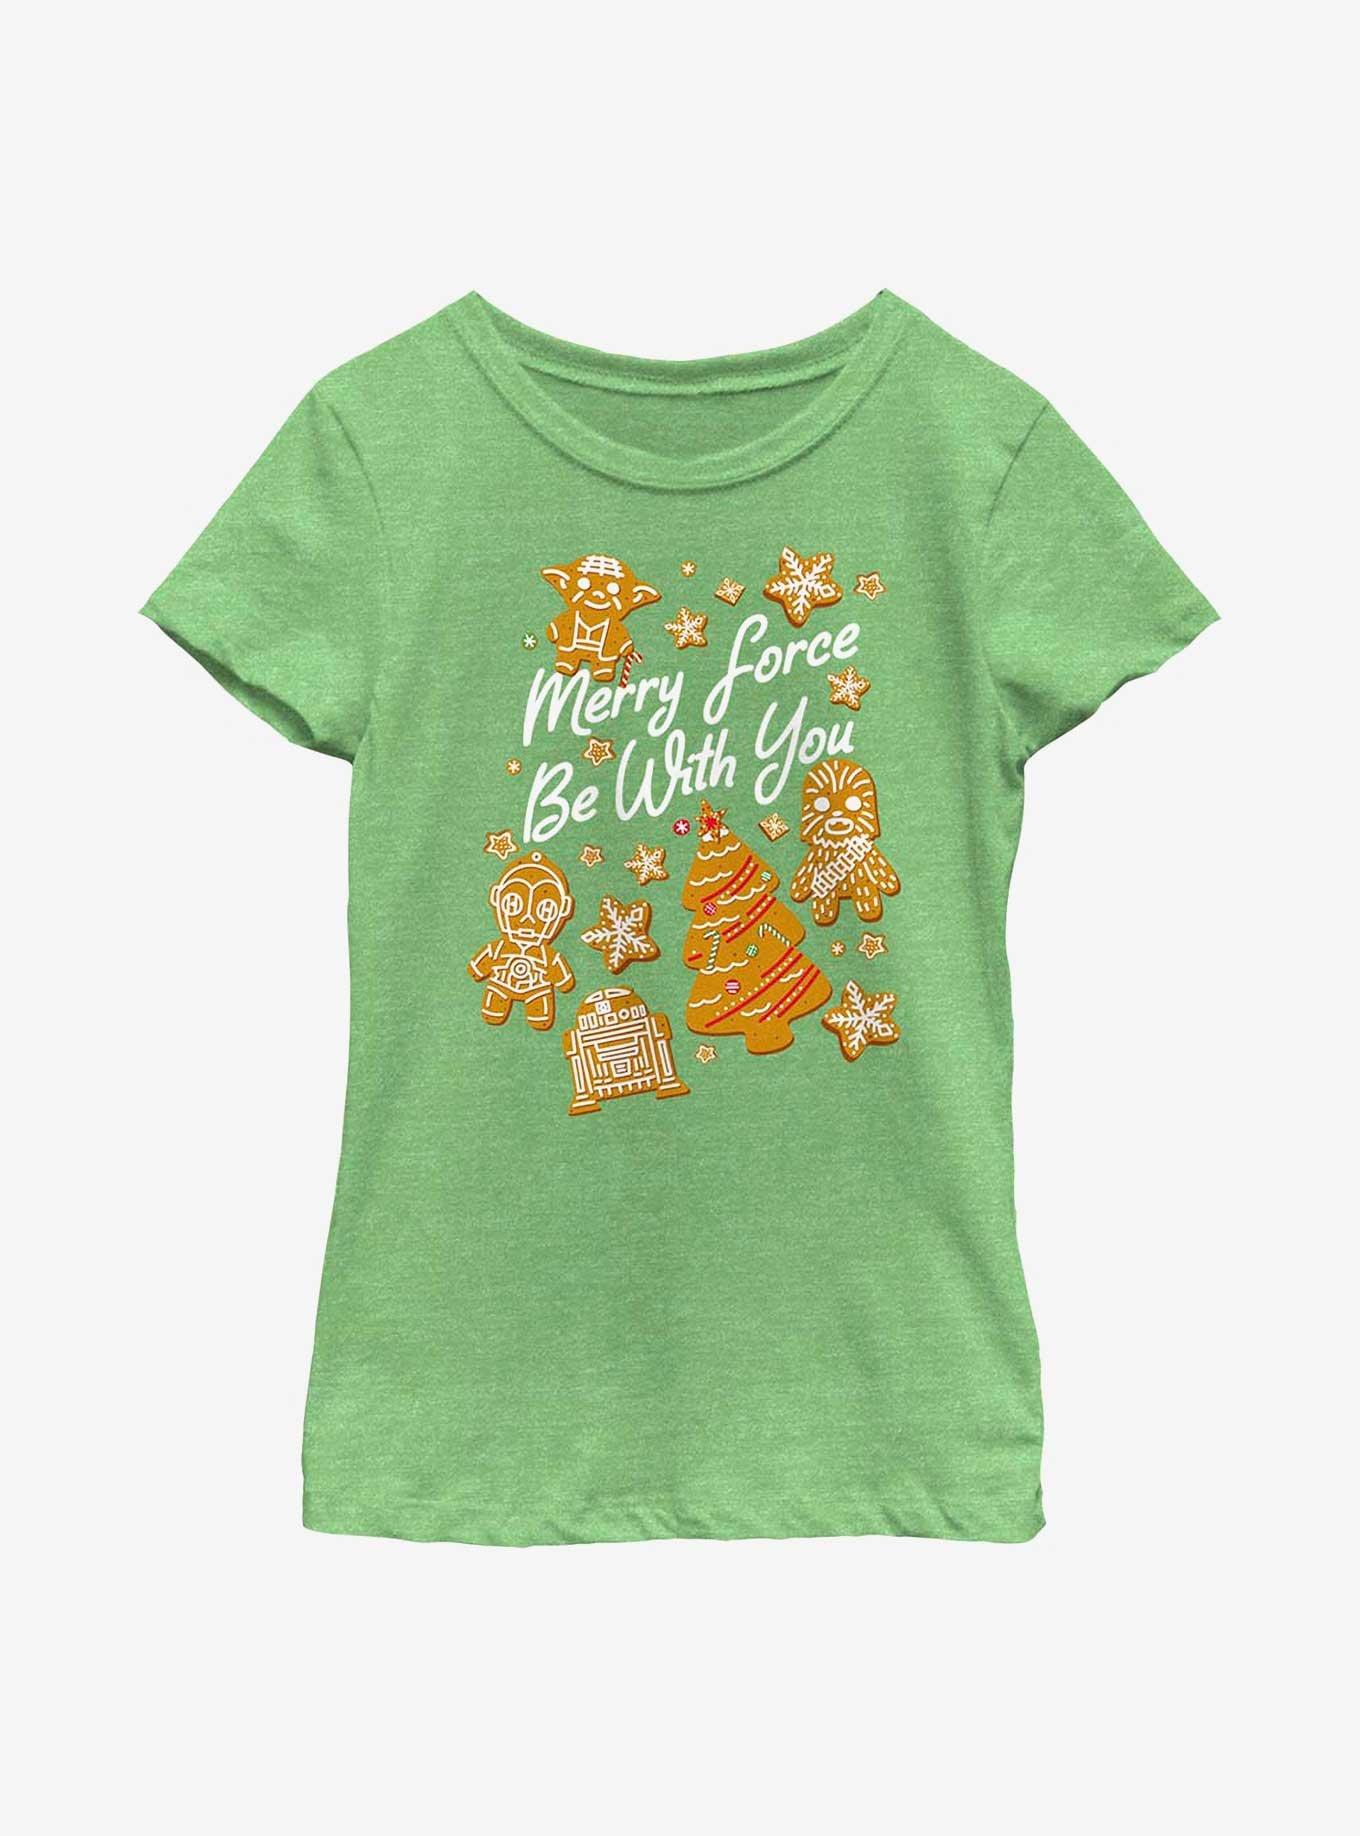 Star Wars Merry Force Be With You Cookies Youth Girls T-Shirt, , hi-res